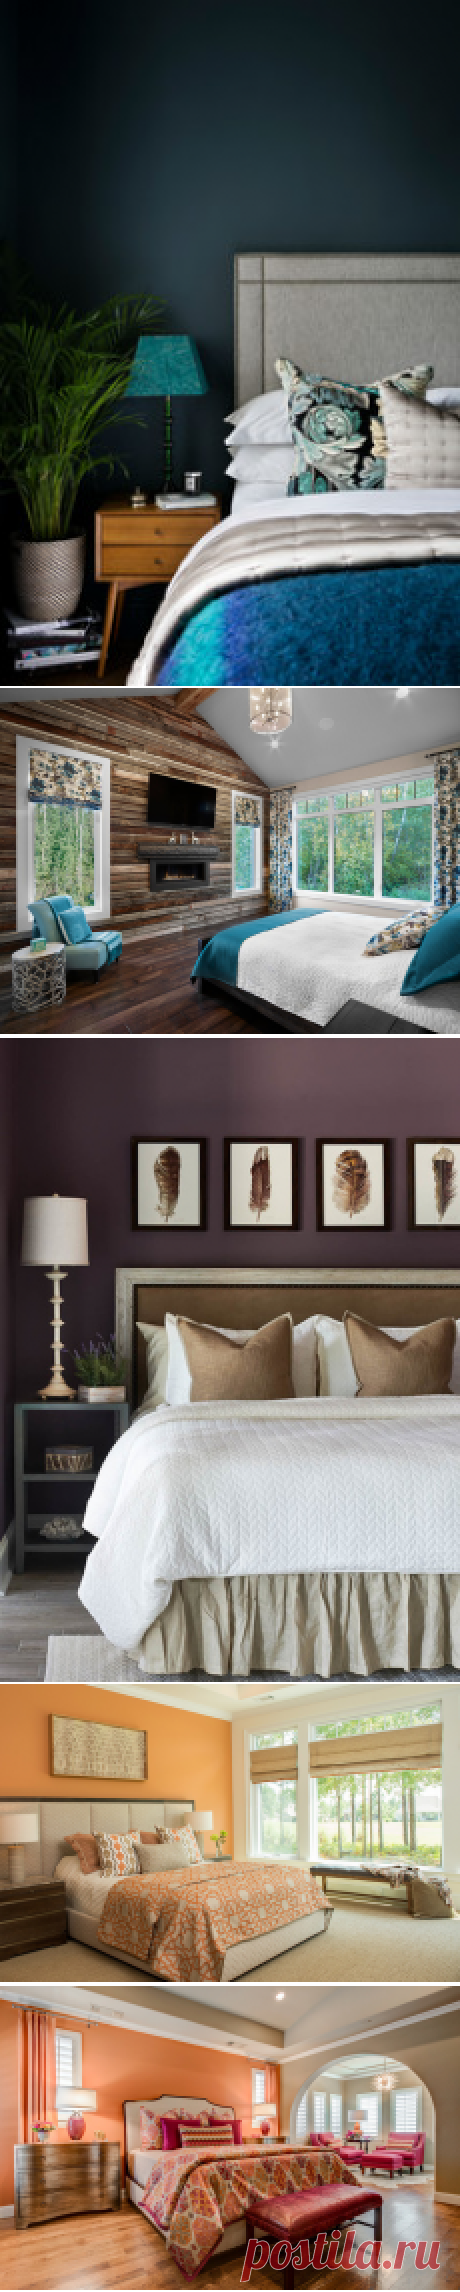 5 Colors for a Romantic Bedroom